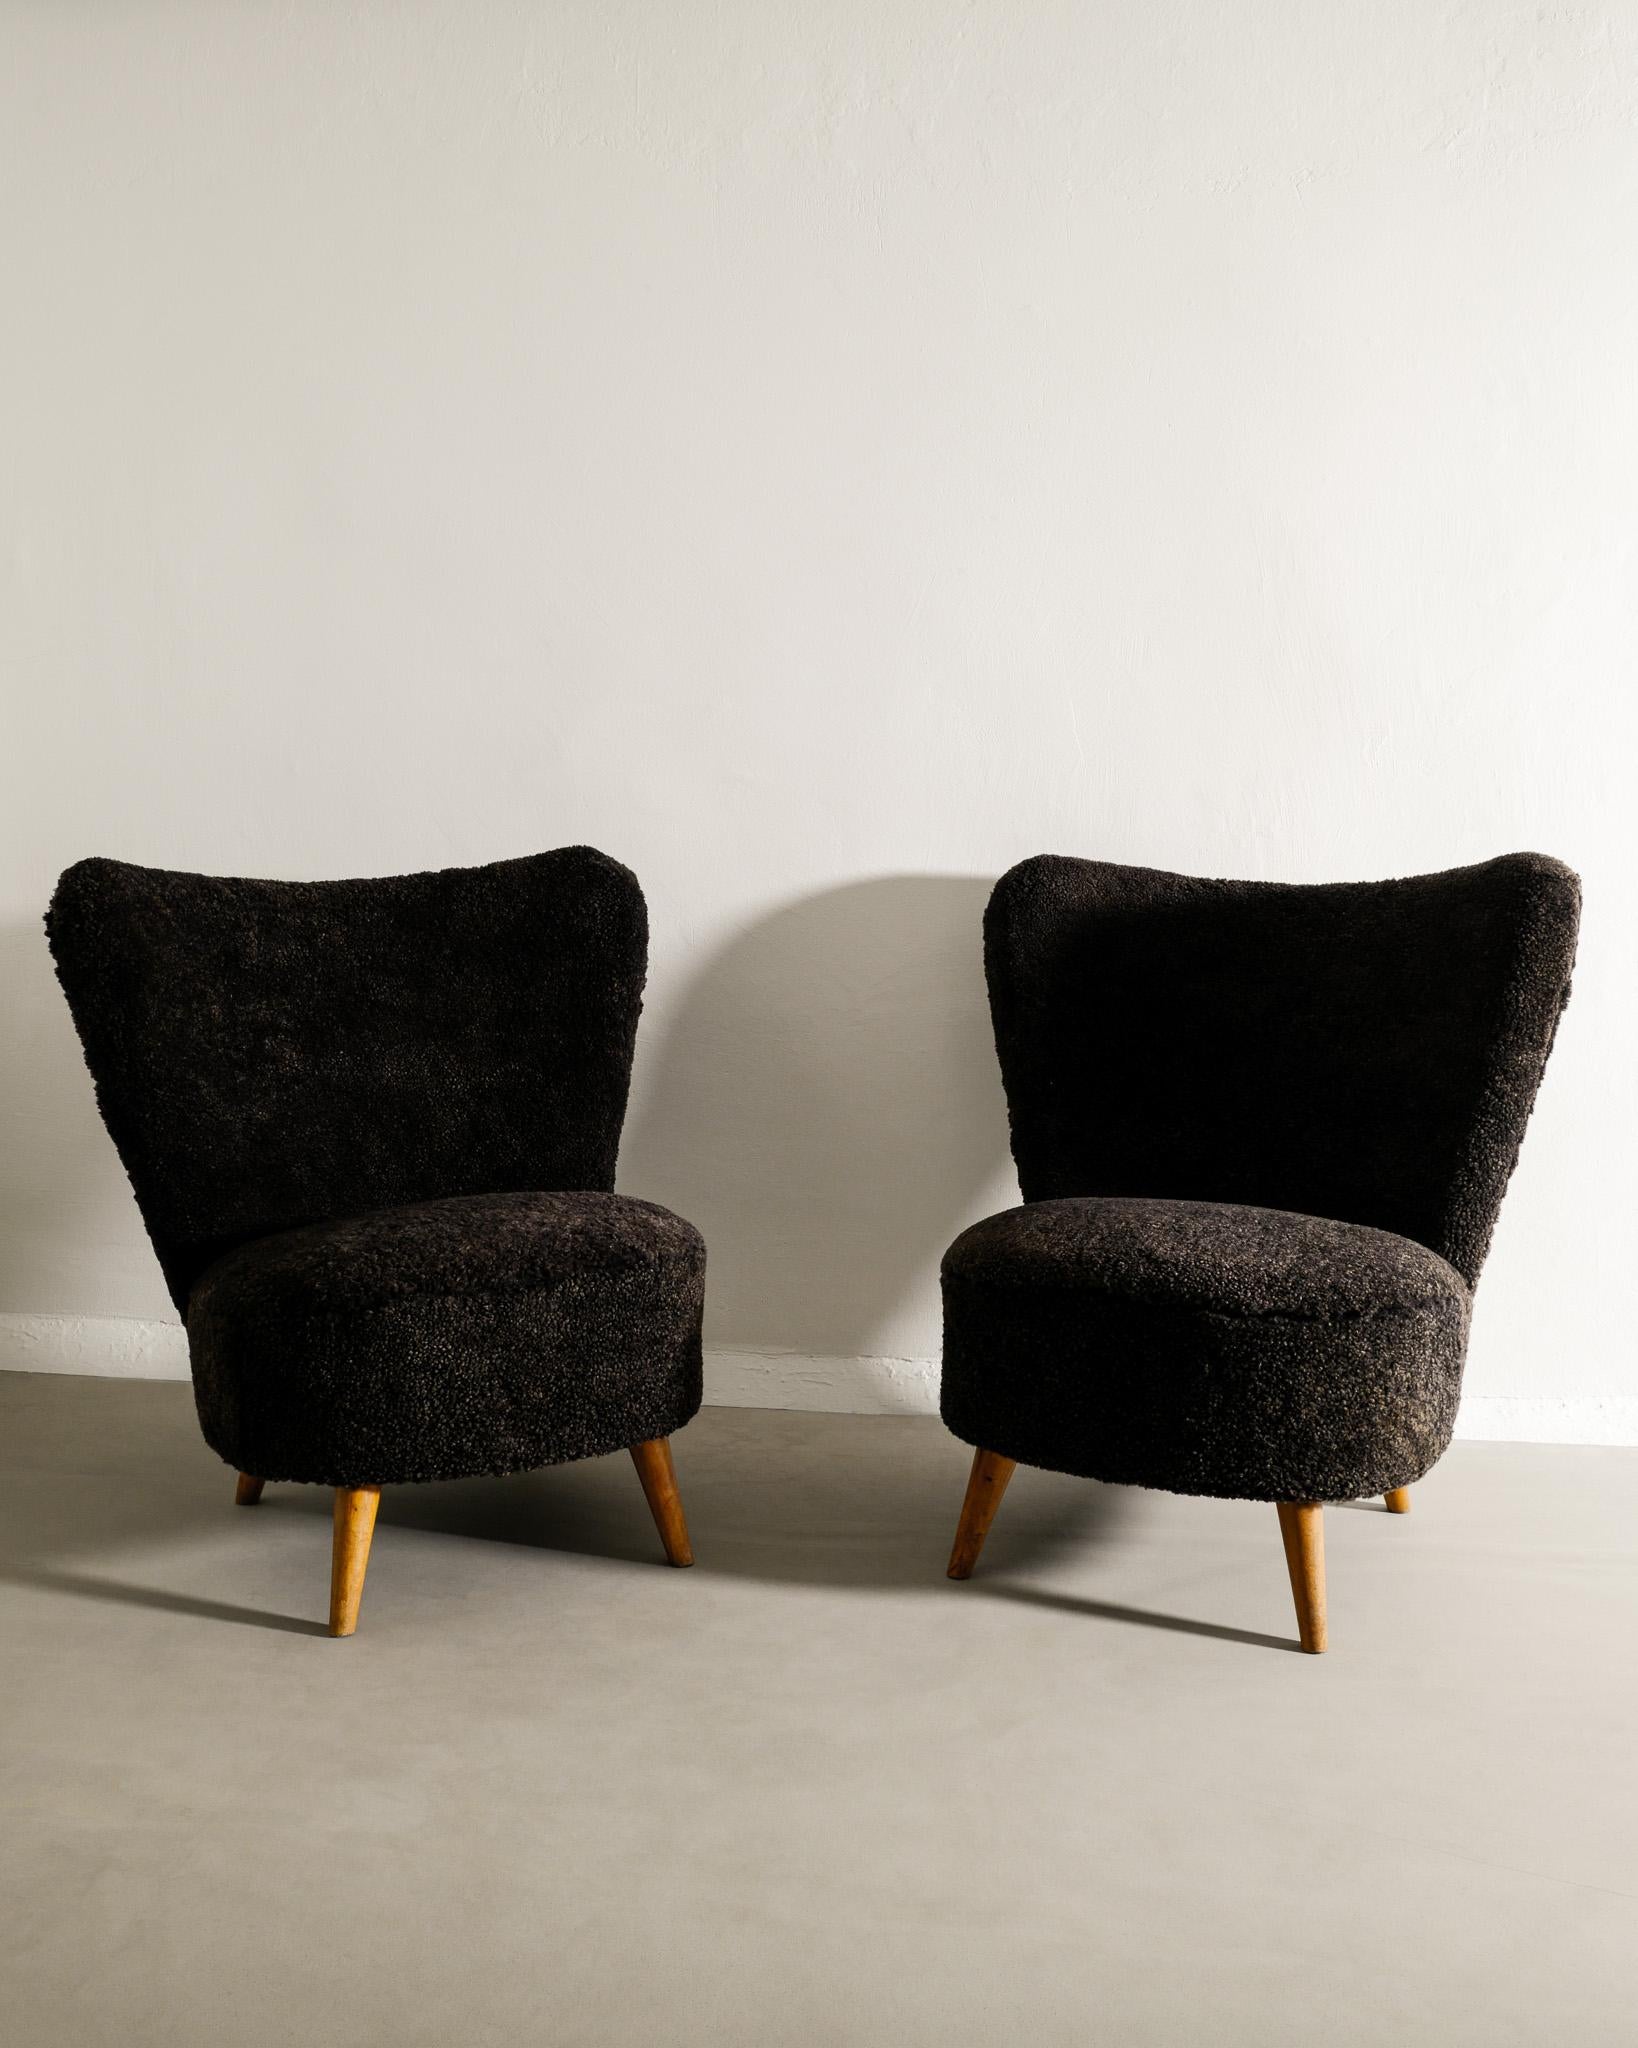 Rare pair of mid century easy chairs produced in Sweden in style of Gösta Jonsson. In great vintage condition. Both chairs have just been professionally restored and upholstered with a dark brown sheepskin. 

Dimensions: H: 78 cm / 30.70